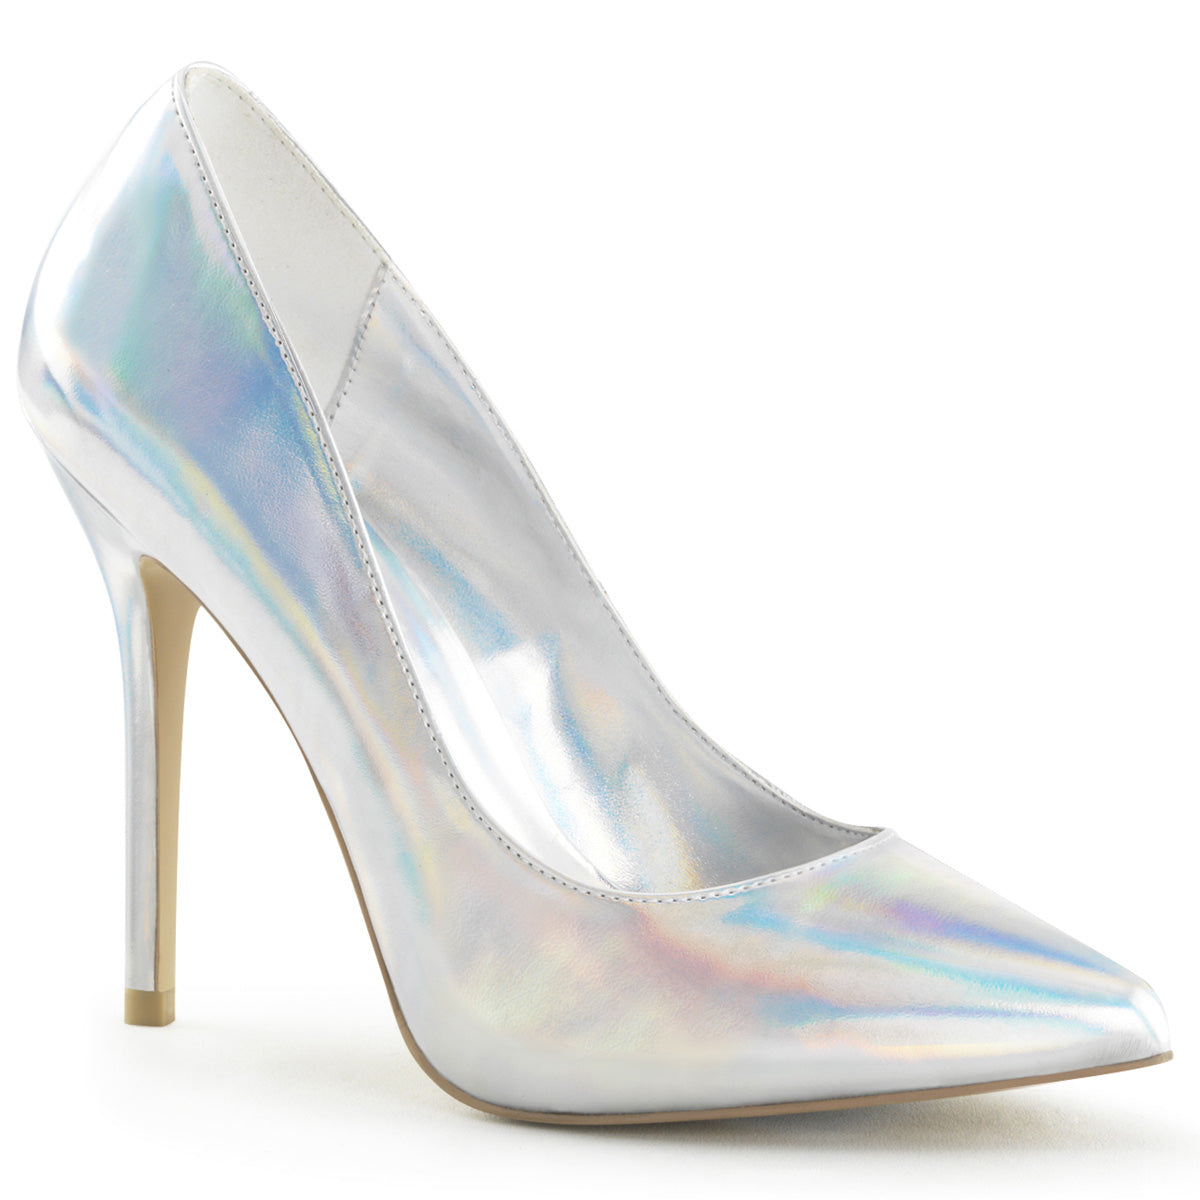 Silver hologram patent leather 5" Amuse Pump right side view.